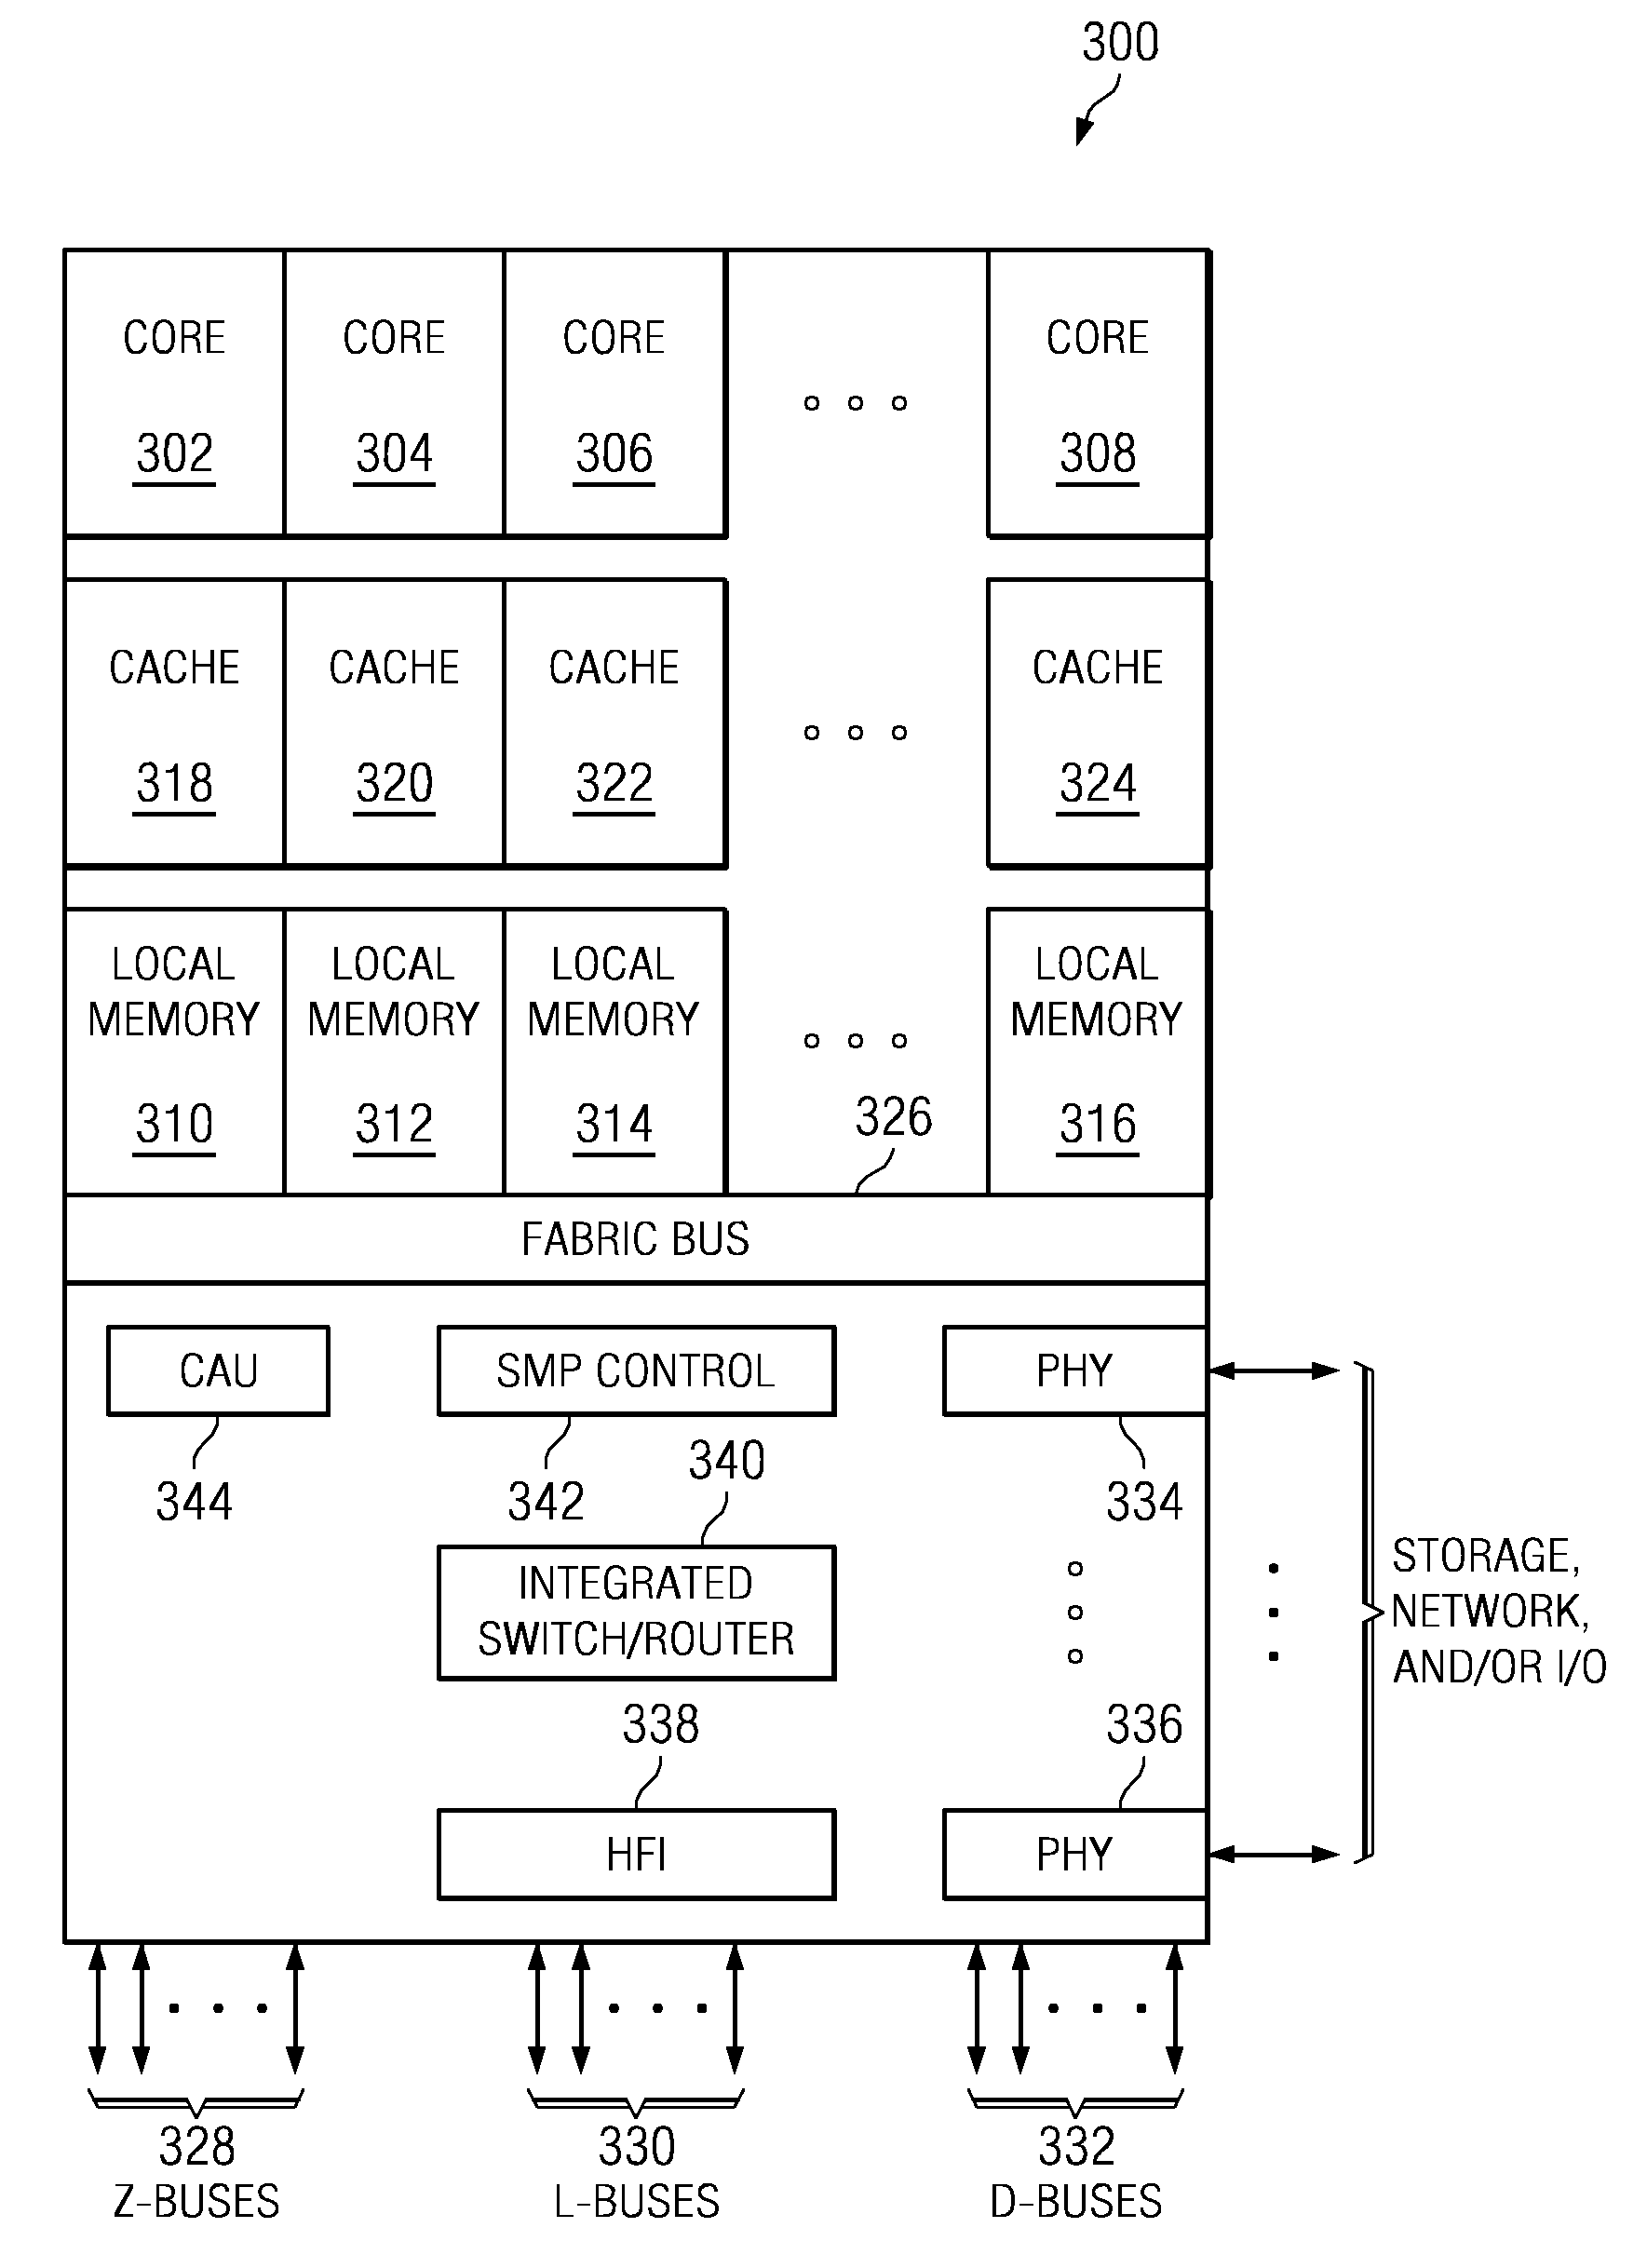 System and Method for Performing Dynamic Request Routing Based on Broadcast Source Request Information